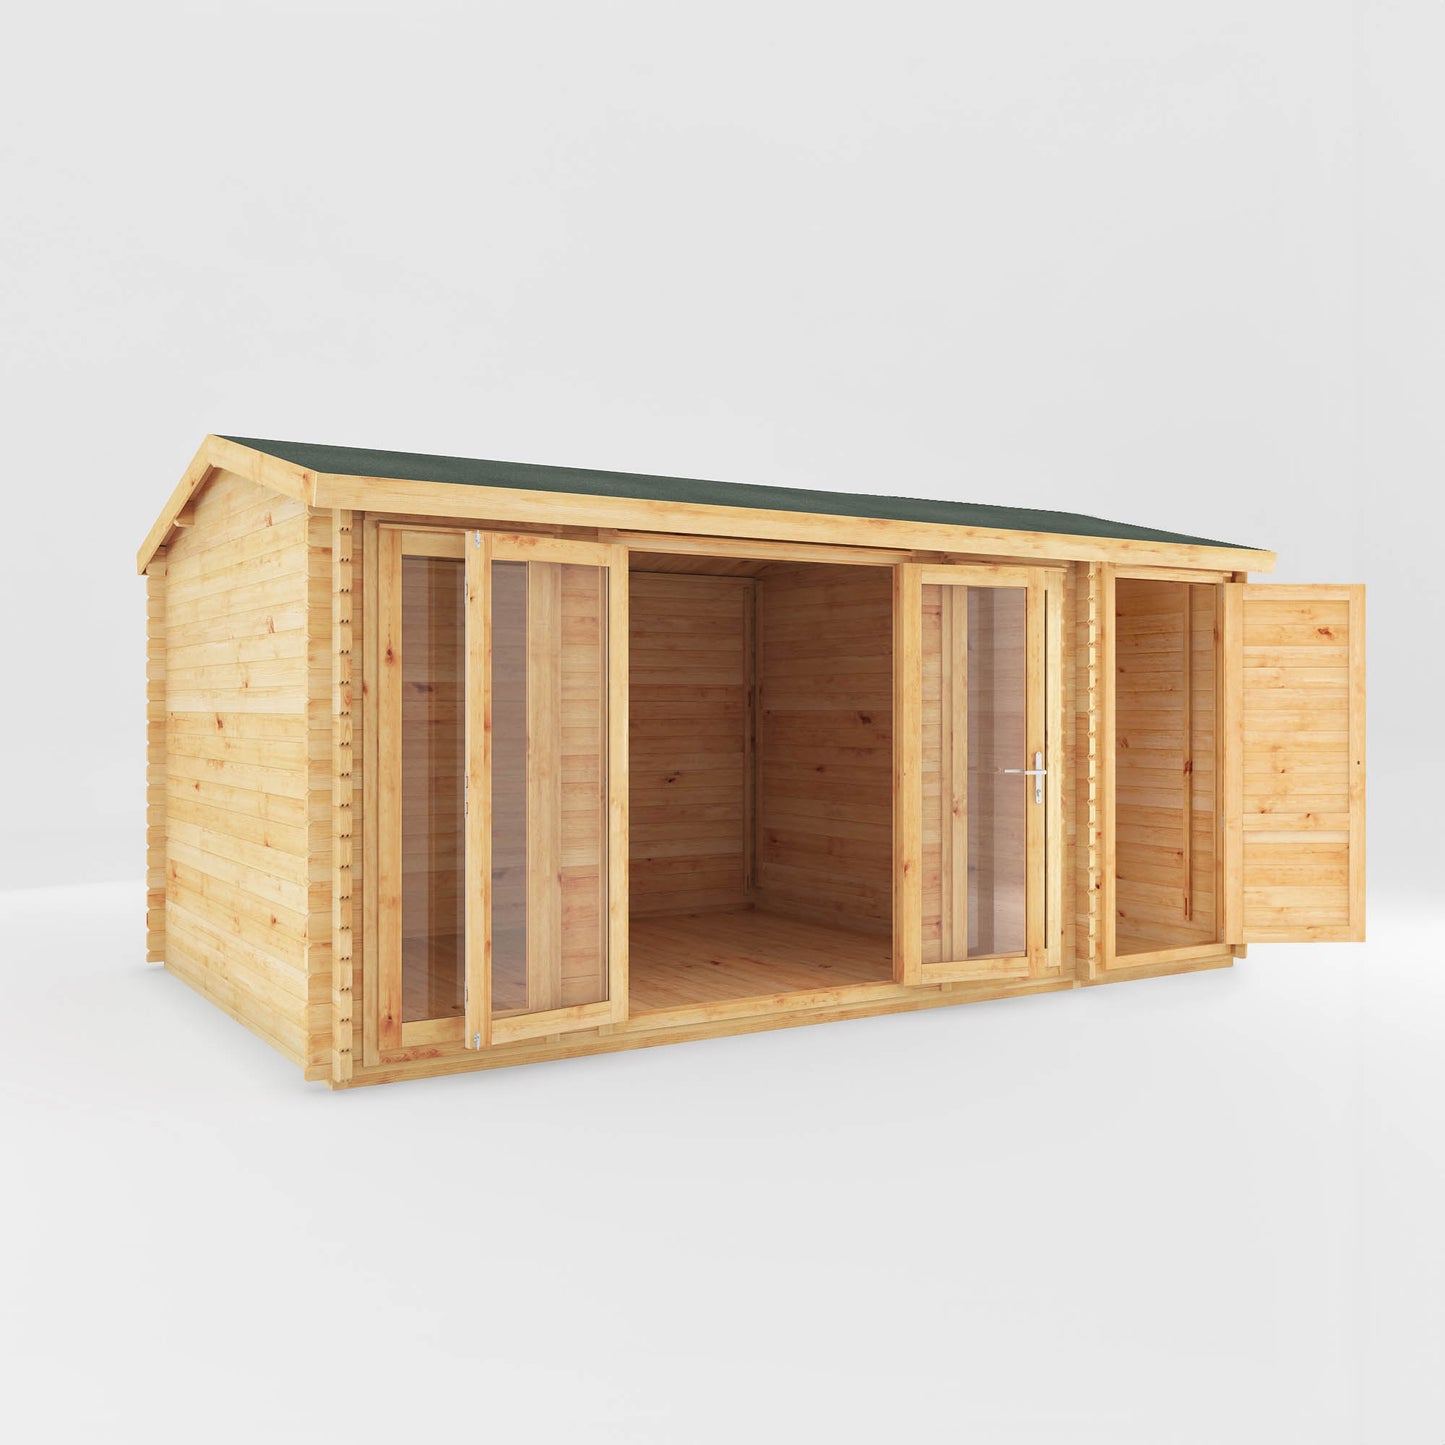 The 5.1m x 3m Dove Log Cabin with Side Shed